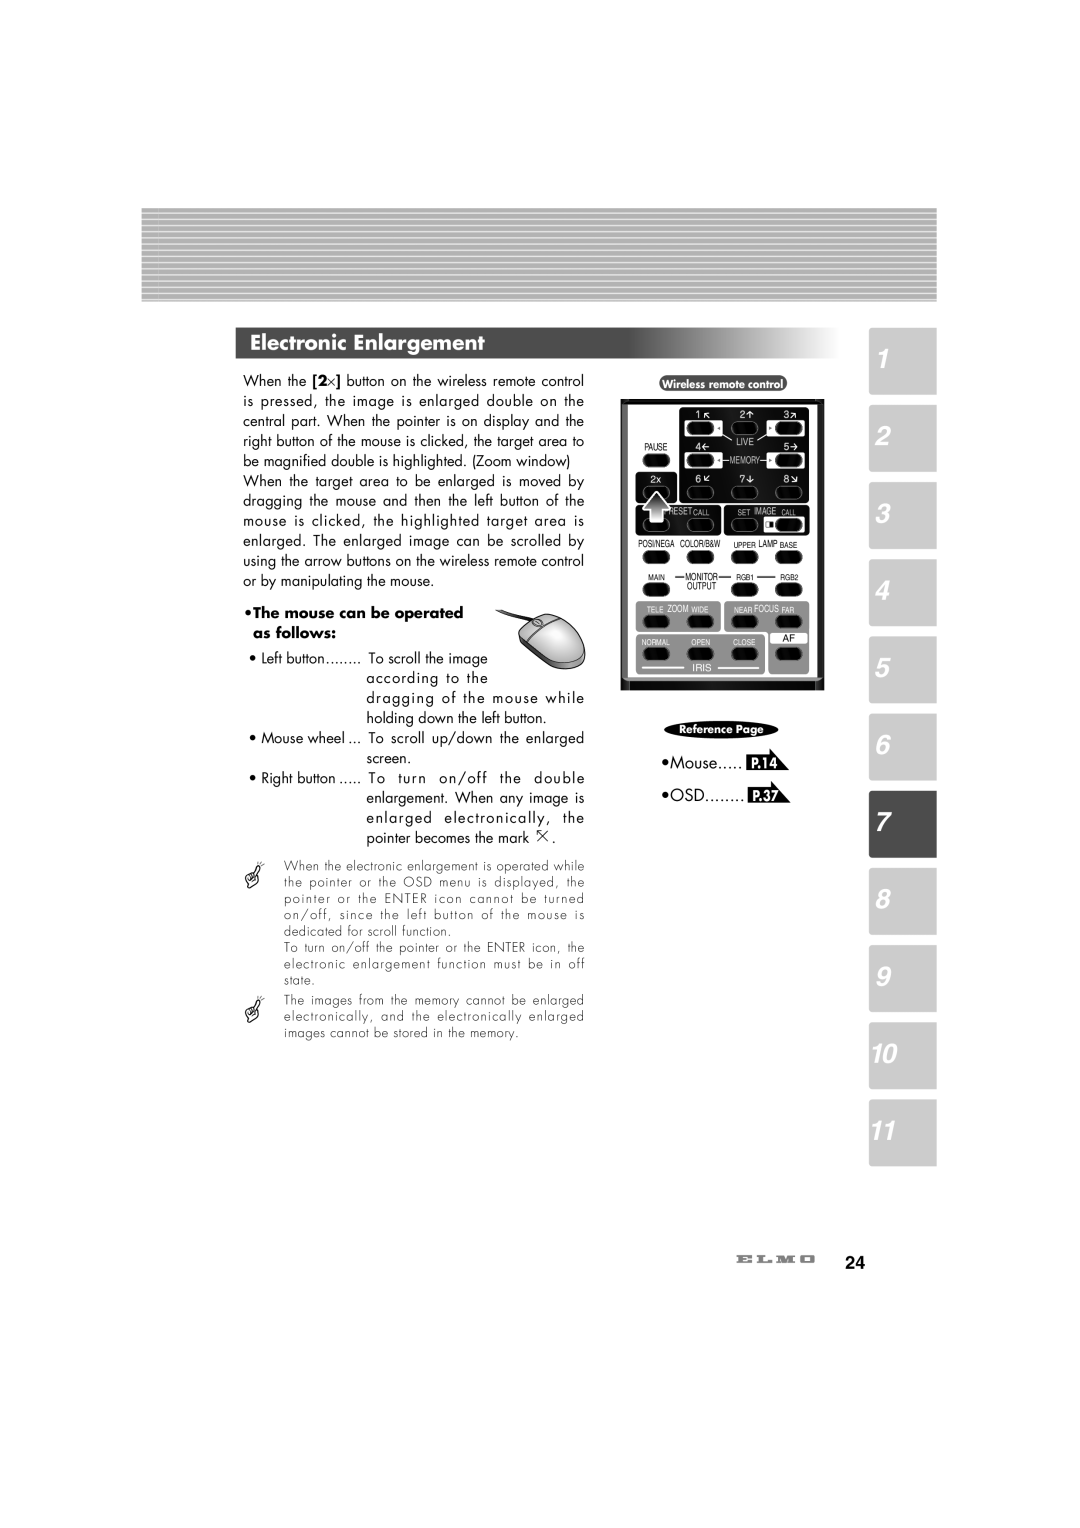 Elmo HV-7100SX Electronic Enlargement, Mouse..... P.14 OSD........ P.37, The mouse can be operated as follows 